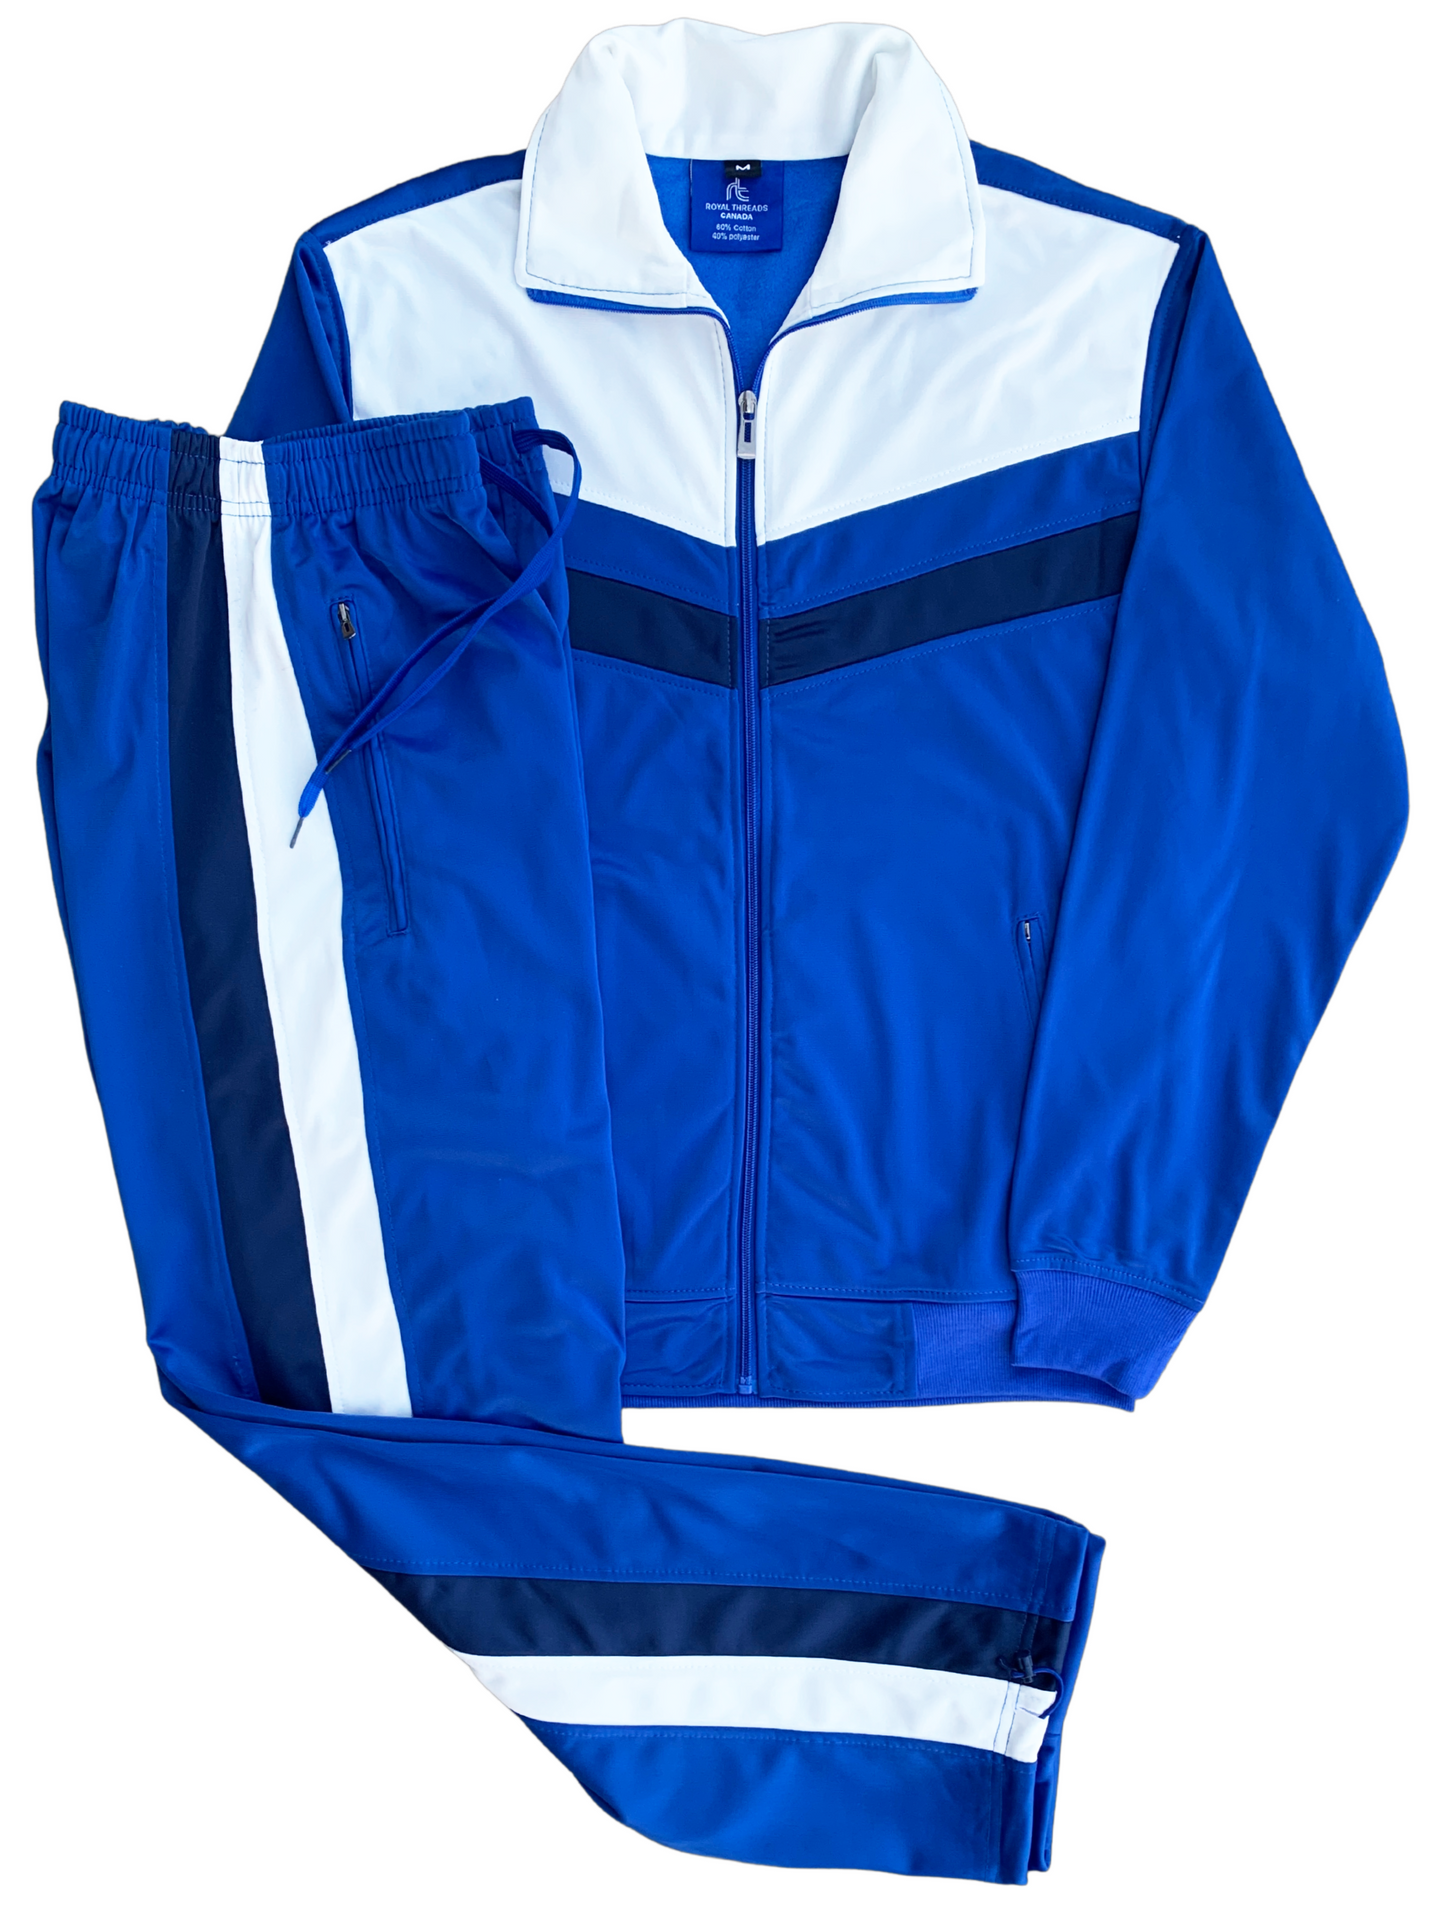 Royal Threads Canada Men's rtGlad Activewear Track Pant and Track Jacket Sports Jogger Athletic Debut 90's Outfit Set